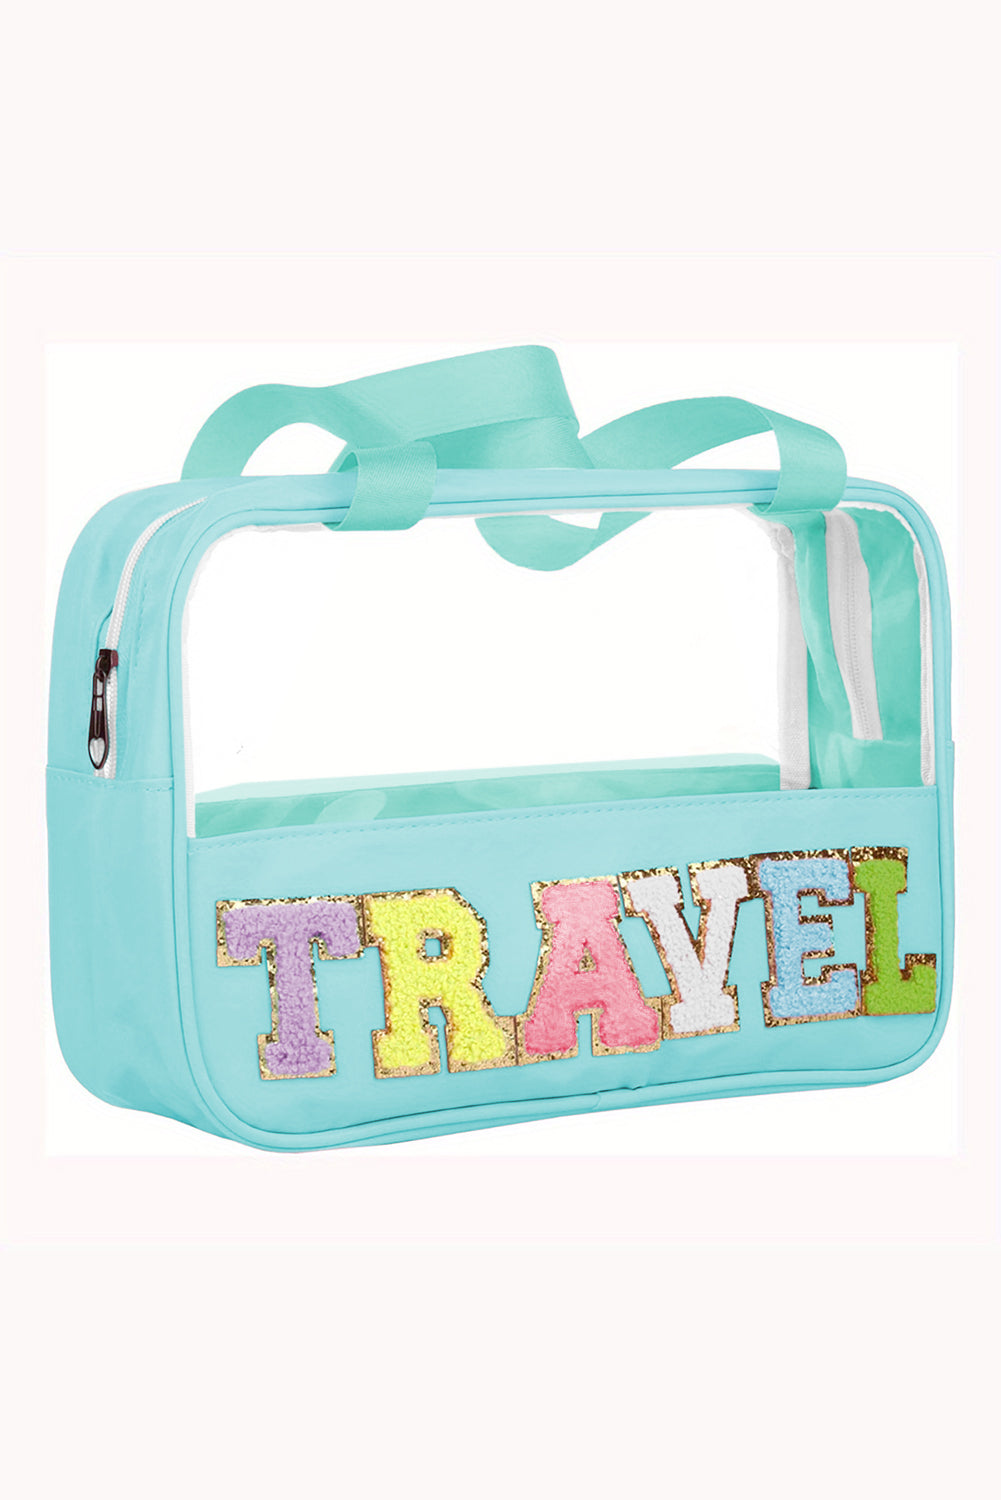 Mint Green TRAVEL Chenille Letter Clear PVC Makeup Bag Other Accessories JT's Designer Fashion